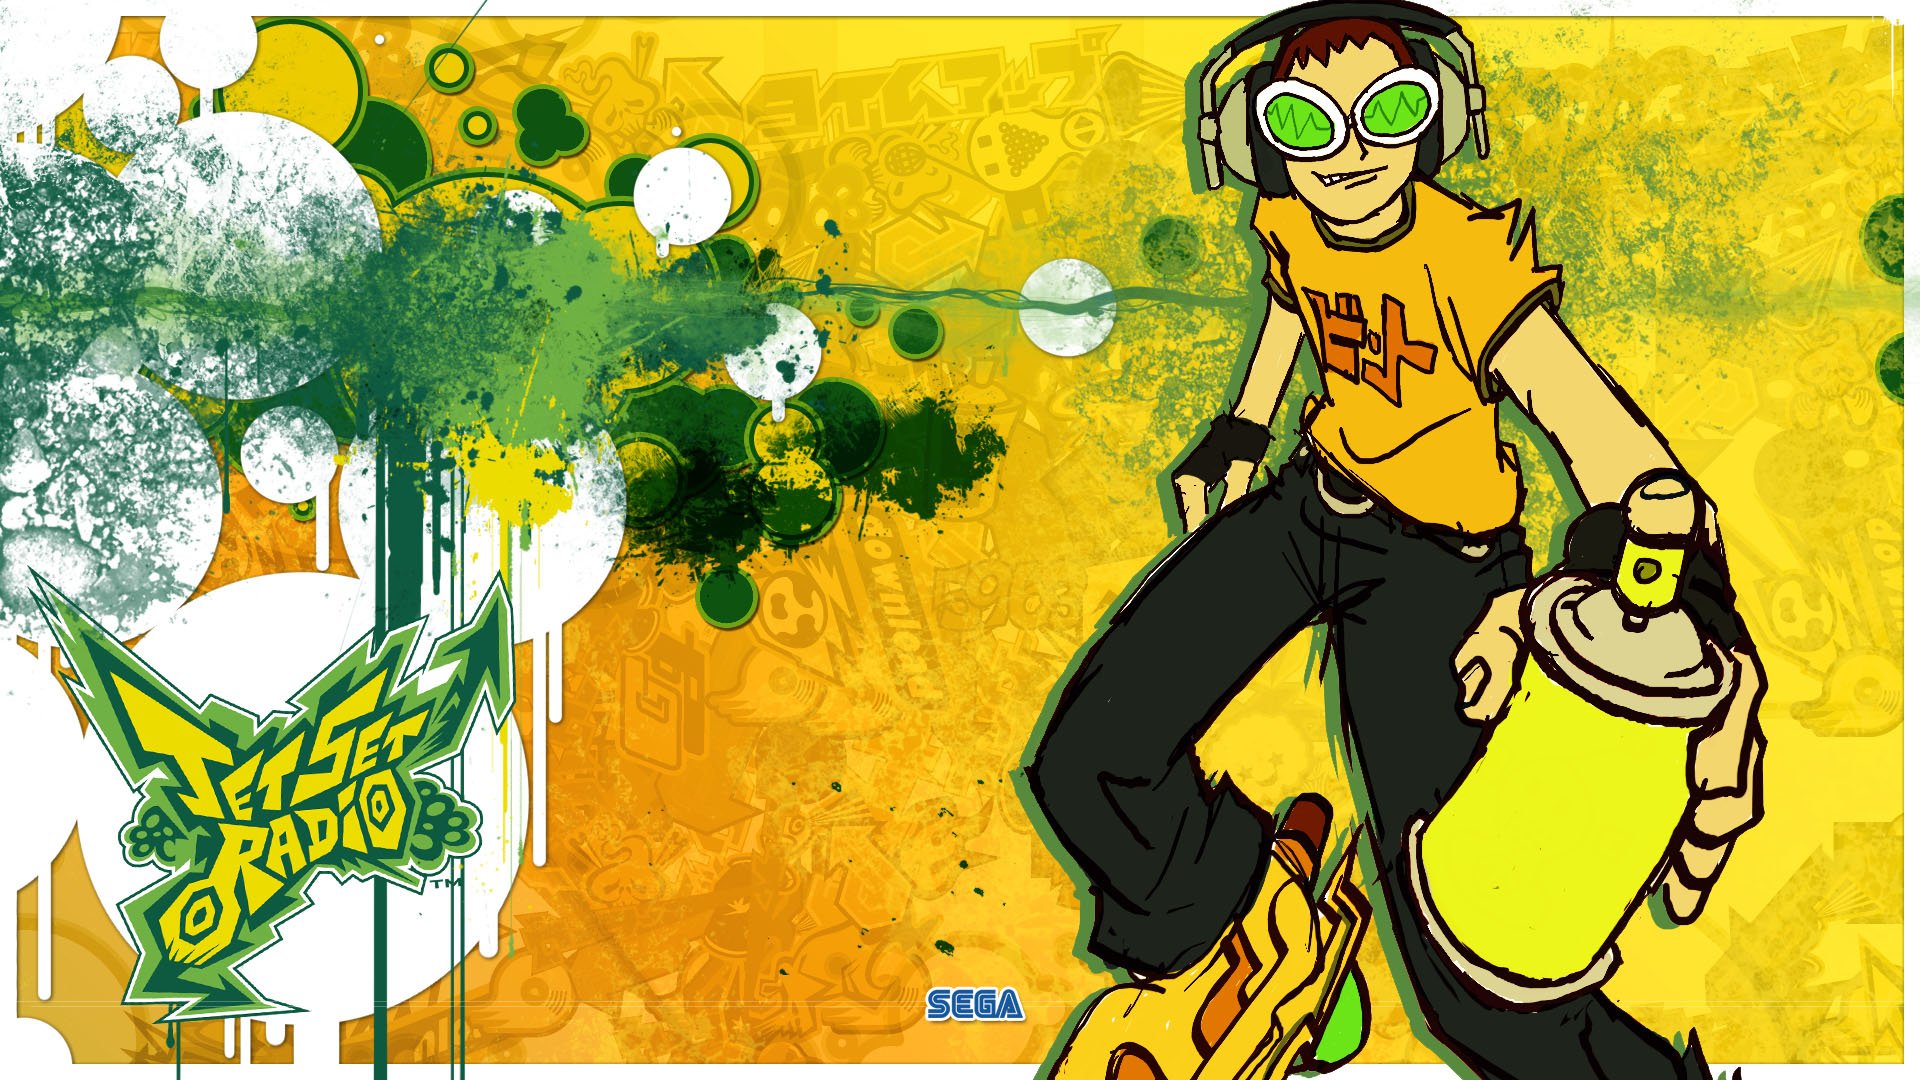 Beat From Jet Set Radio Joins Super | Gaming Instincts